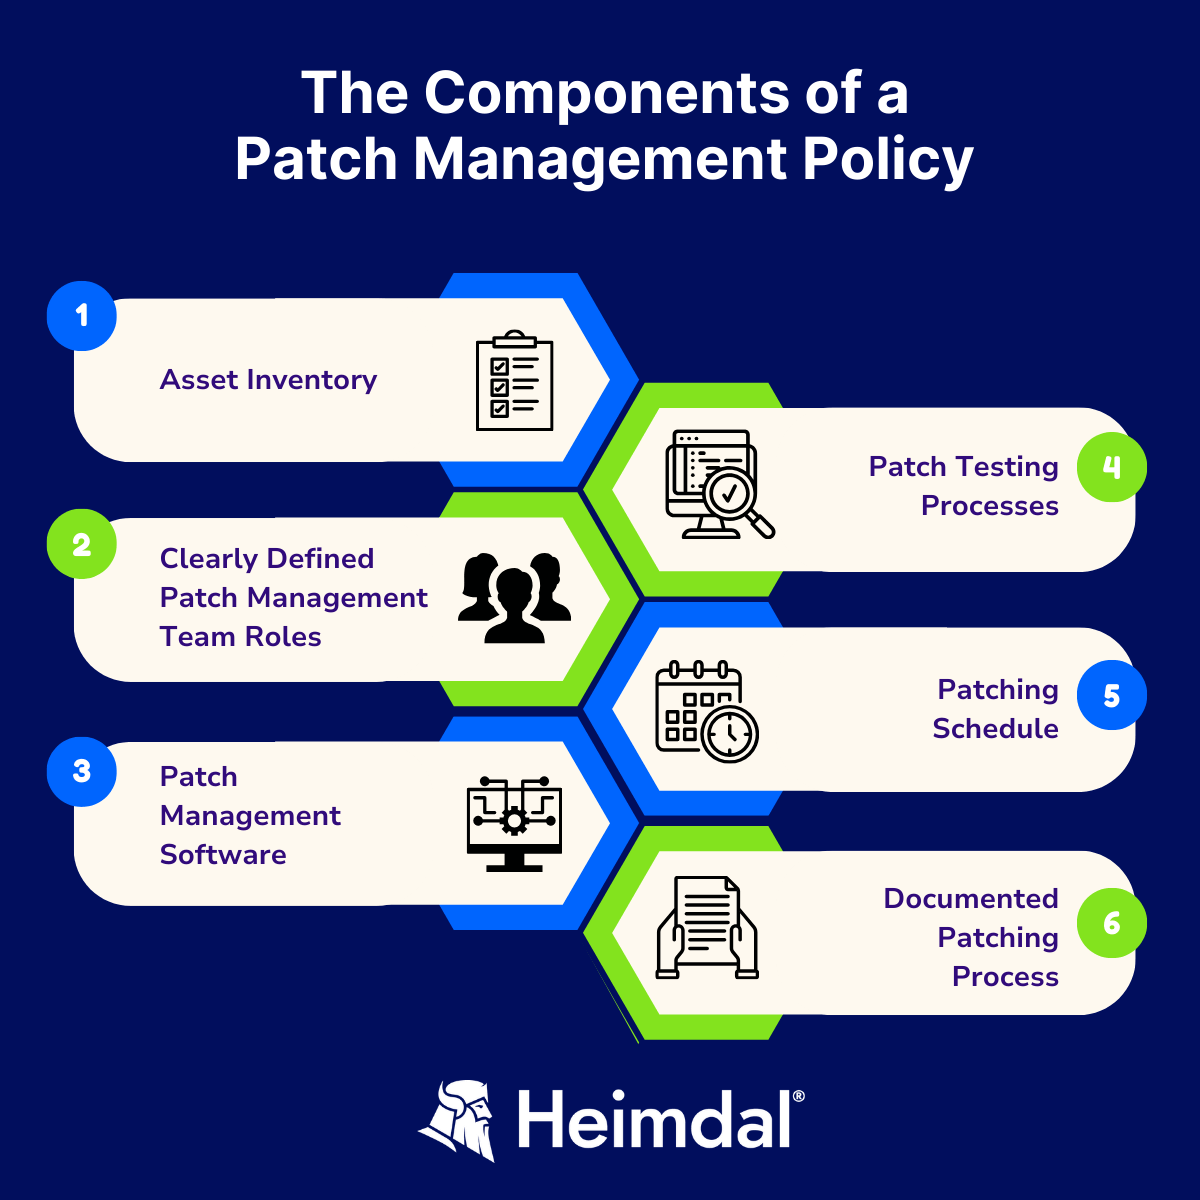 List containing all the components necessary and steps to create an effective patch management policy on a blue background.